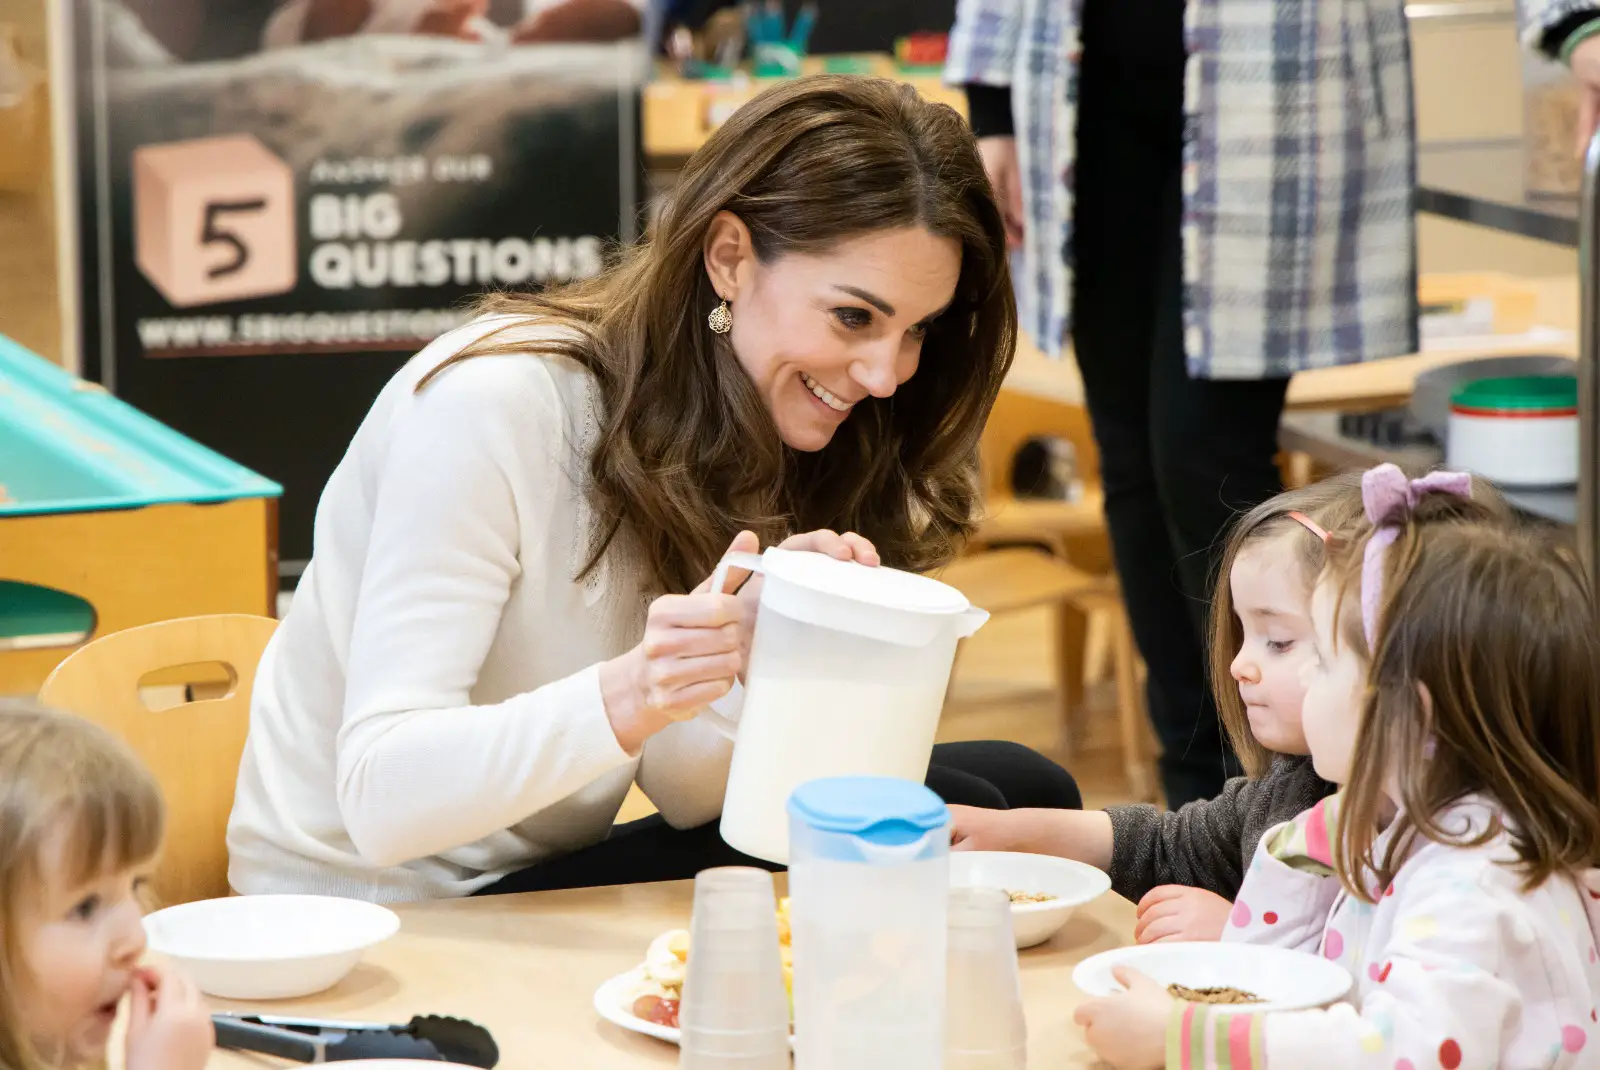 During the visit to LEYF, The Duchess of Cambridge met with Giovanna Fletcher, host of Happy Mum Happy Baby